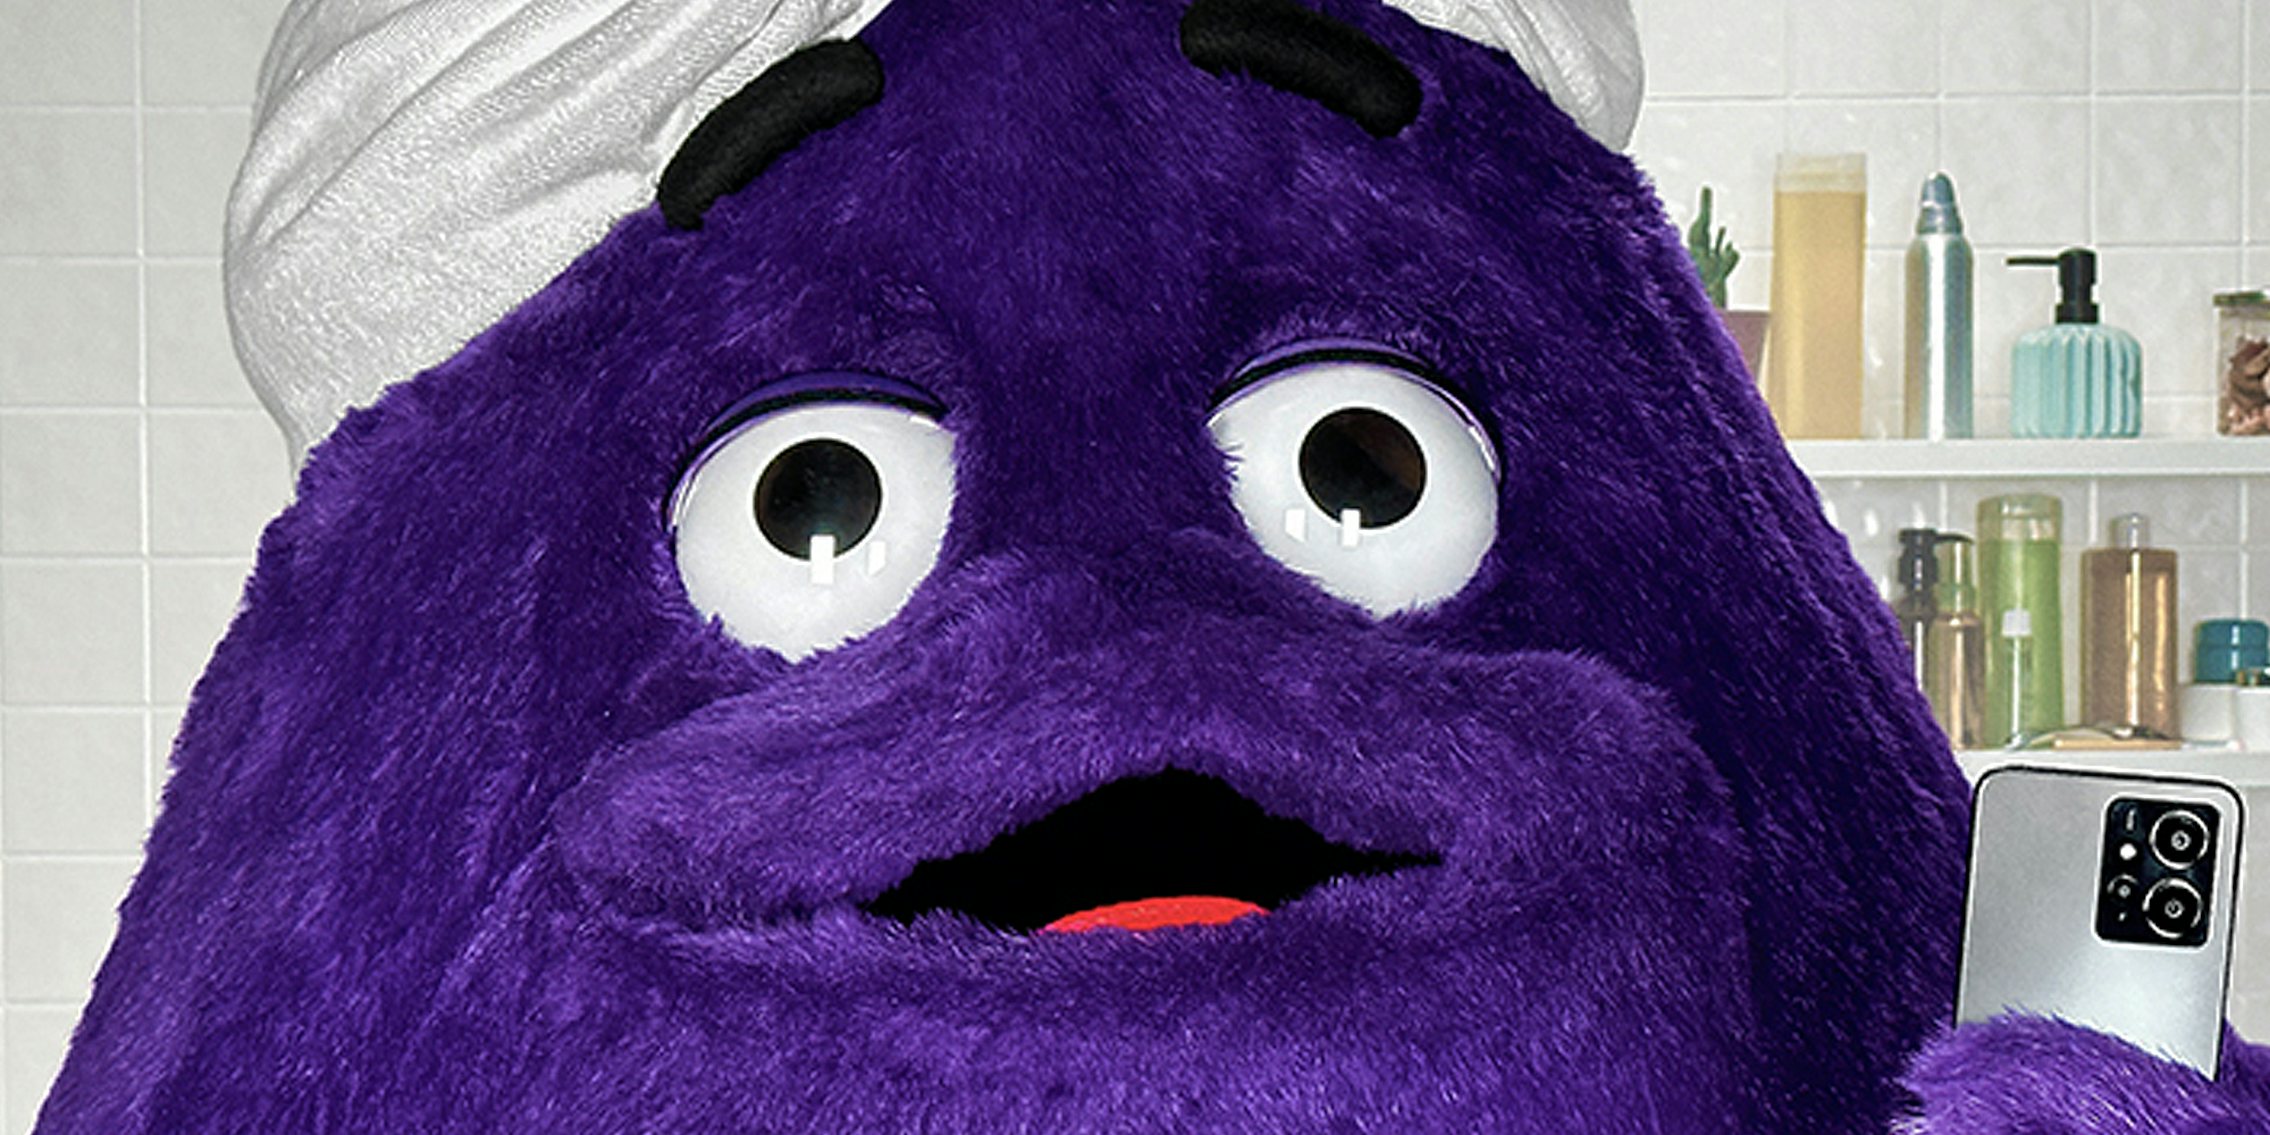 McDonald's character Grimace posing in mirror selfie in bathroom with towel wrapped on head